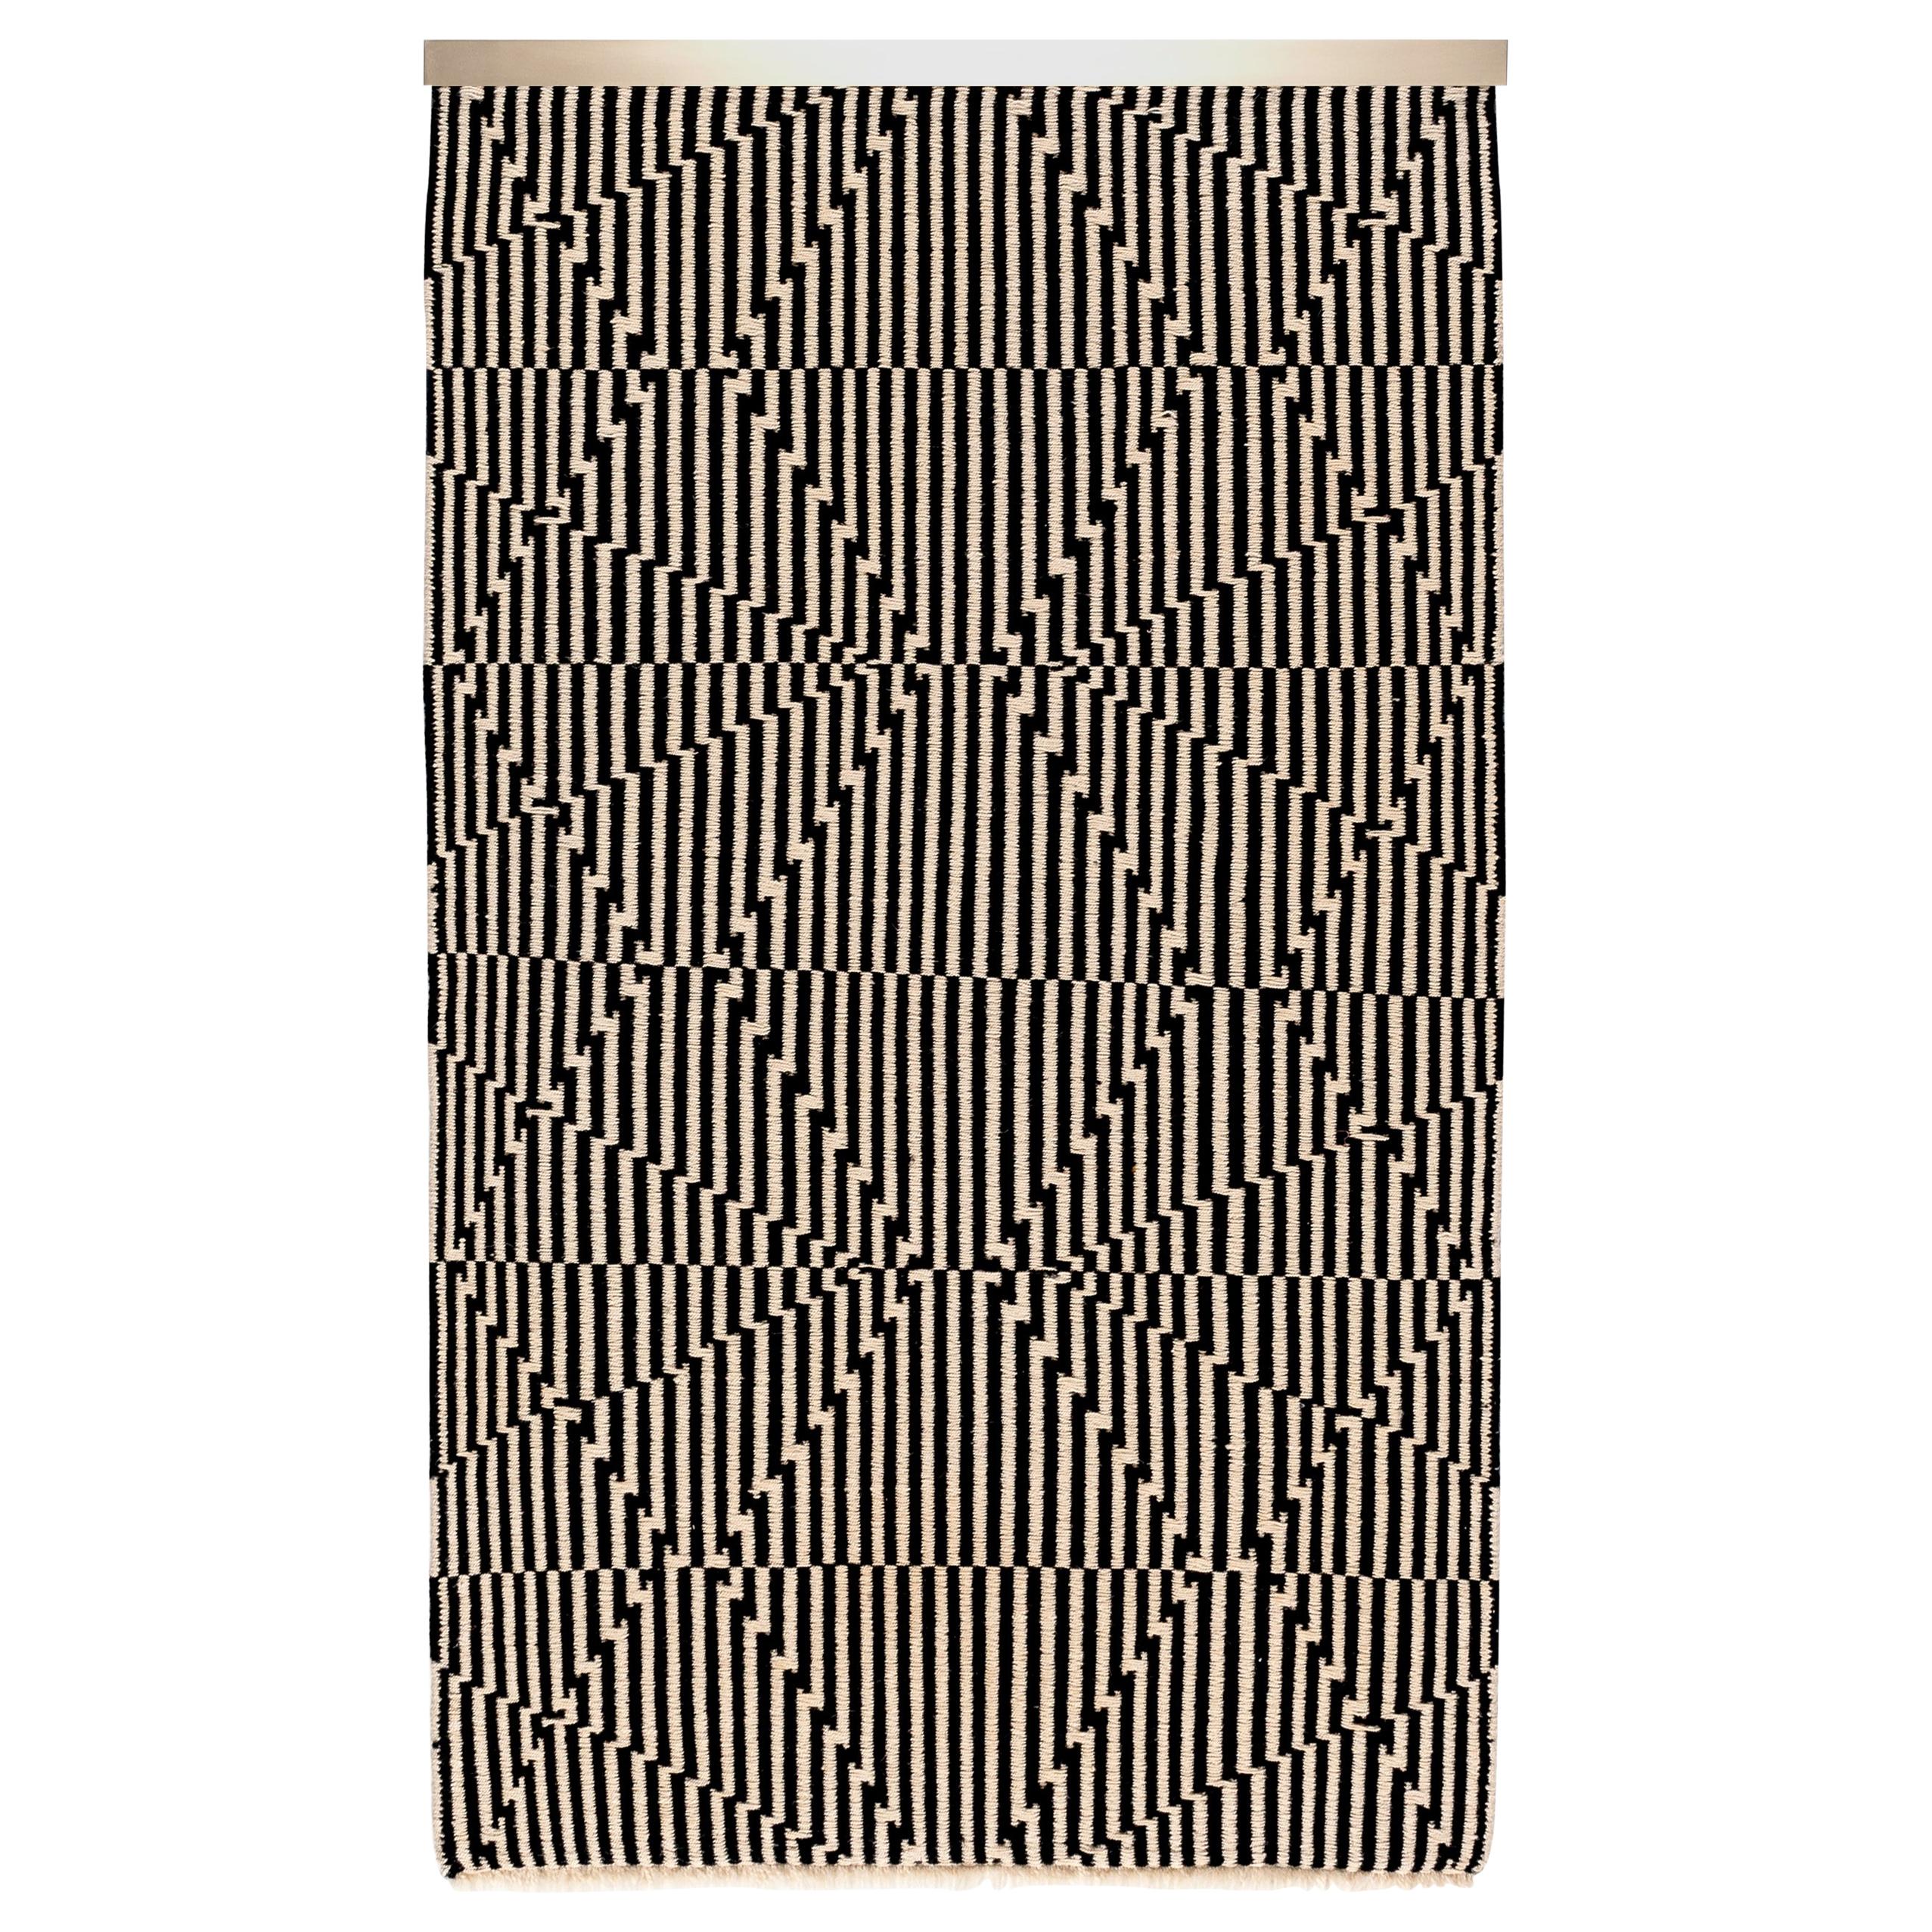 Opticals Wall Hanging Intersection Handwoven Wool in Black and White In Stock For Sale